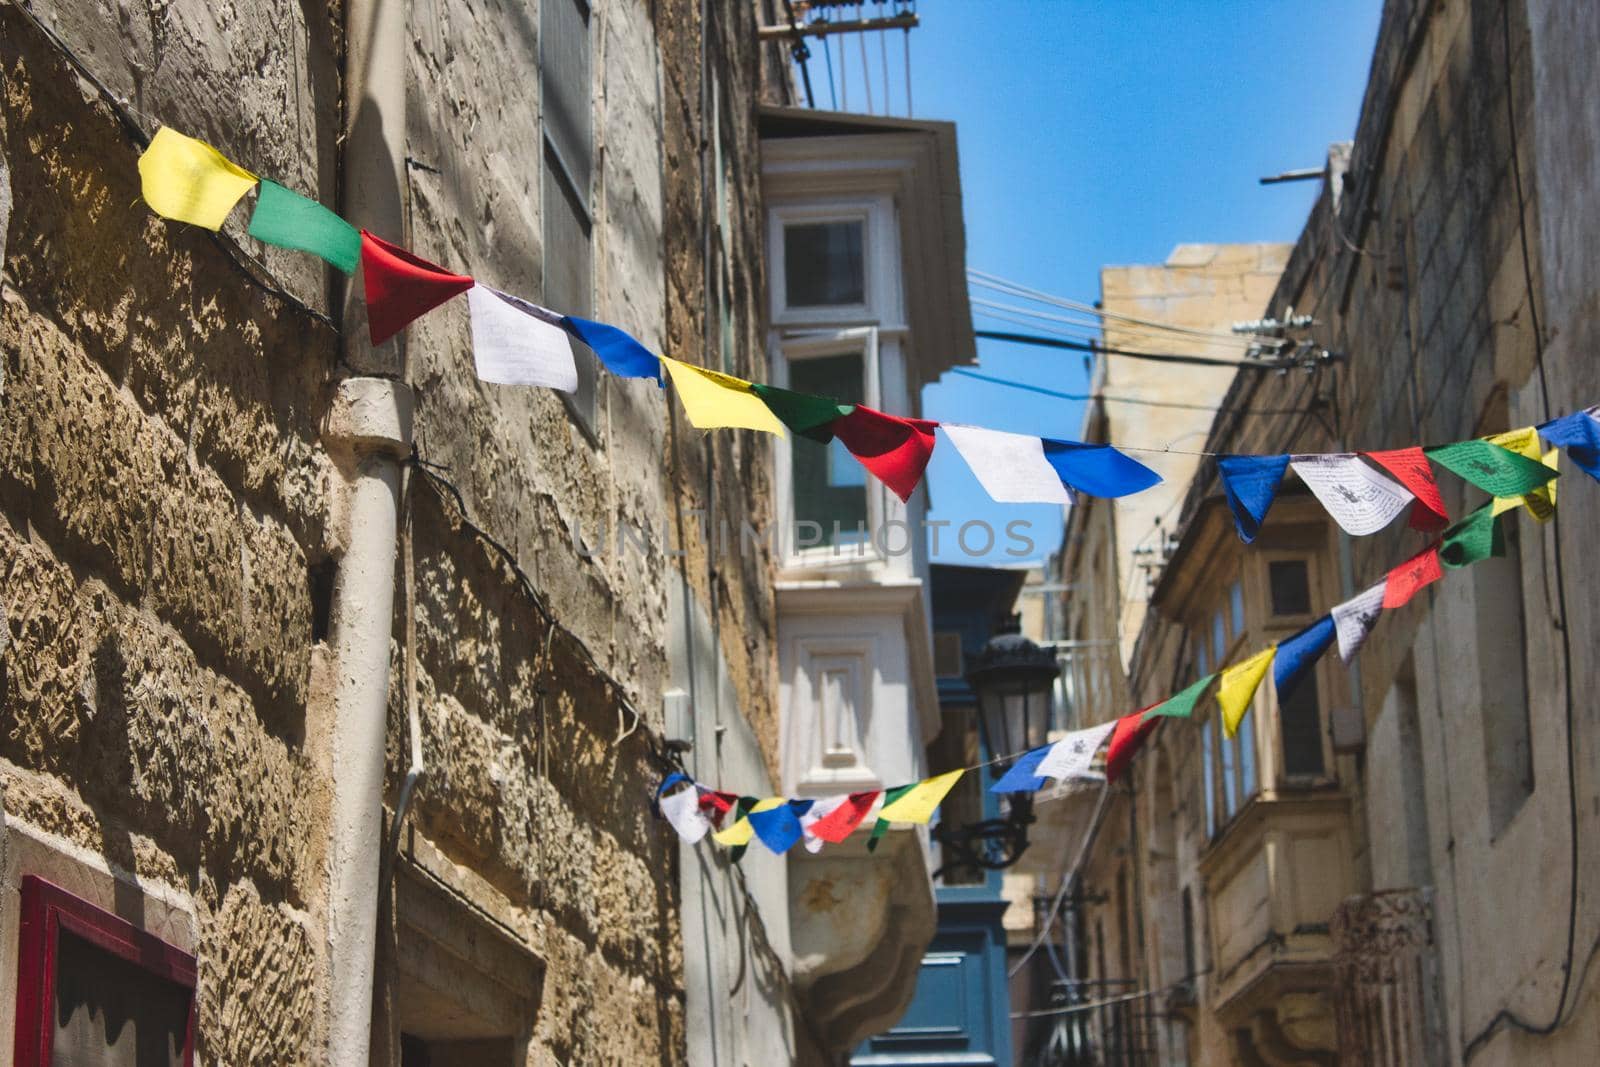 Multi-colored bunting hanging between the houses in a narrow street